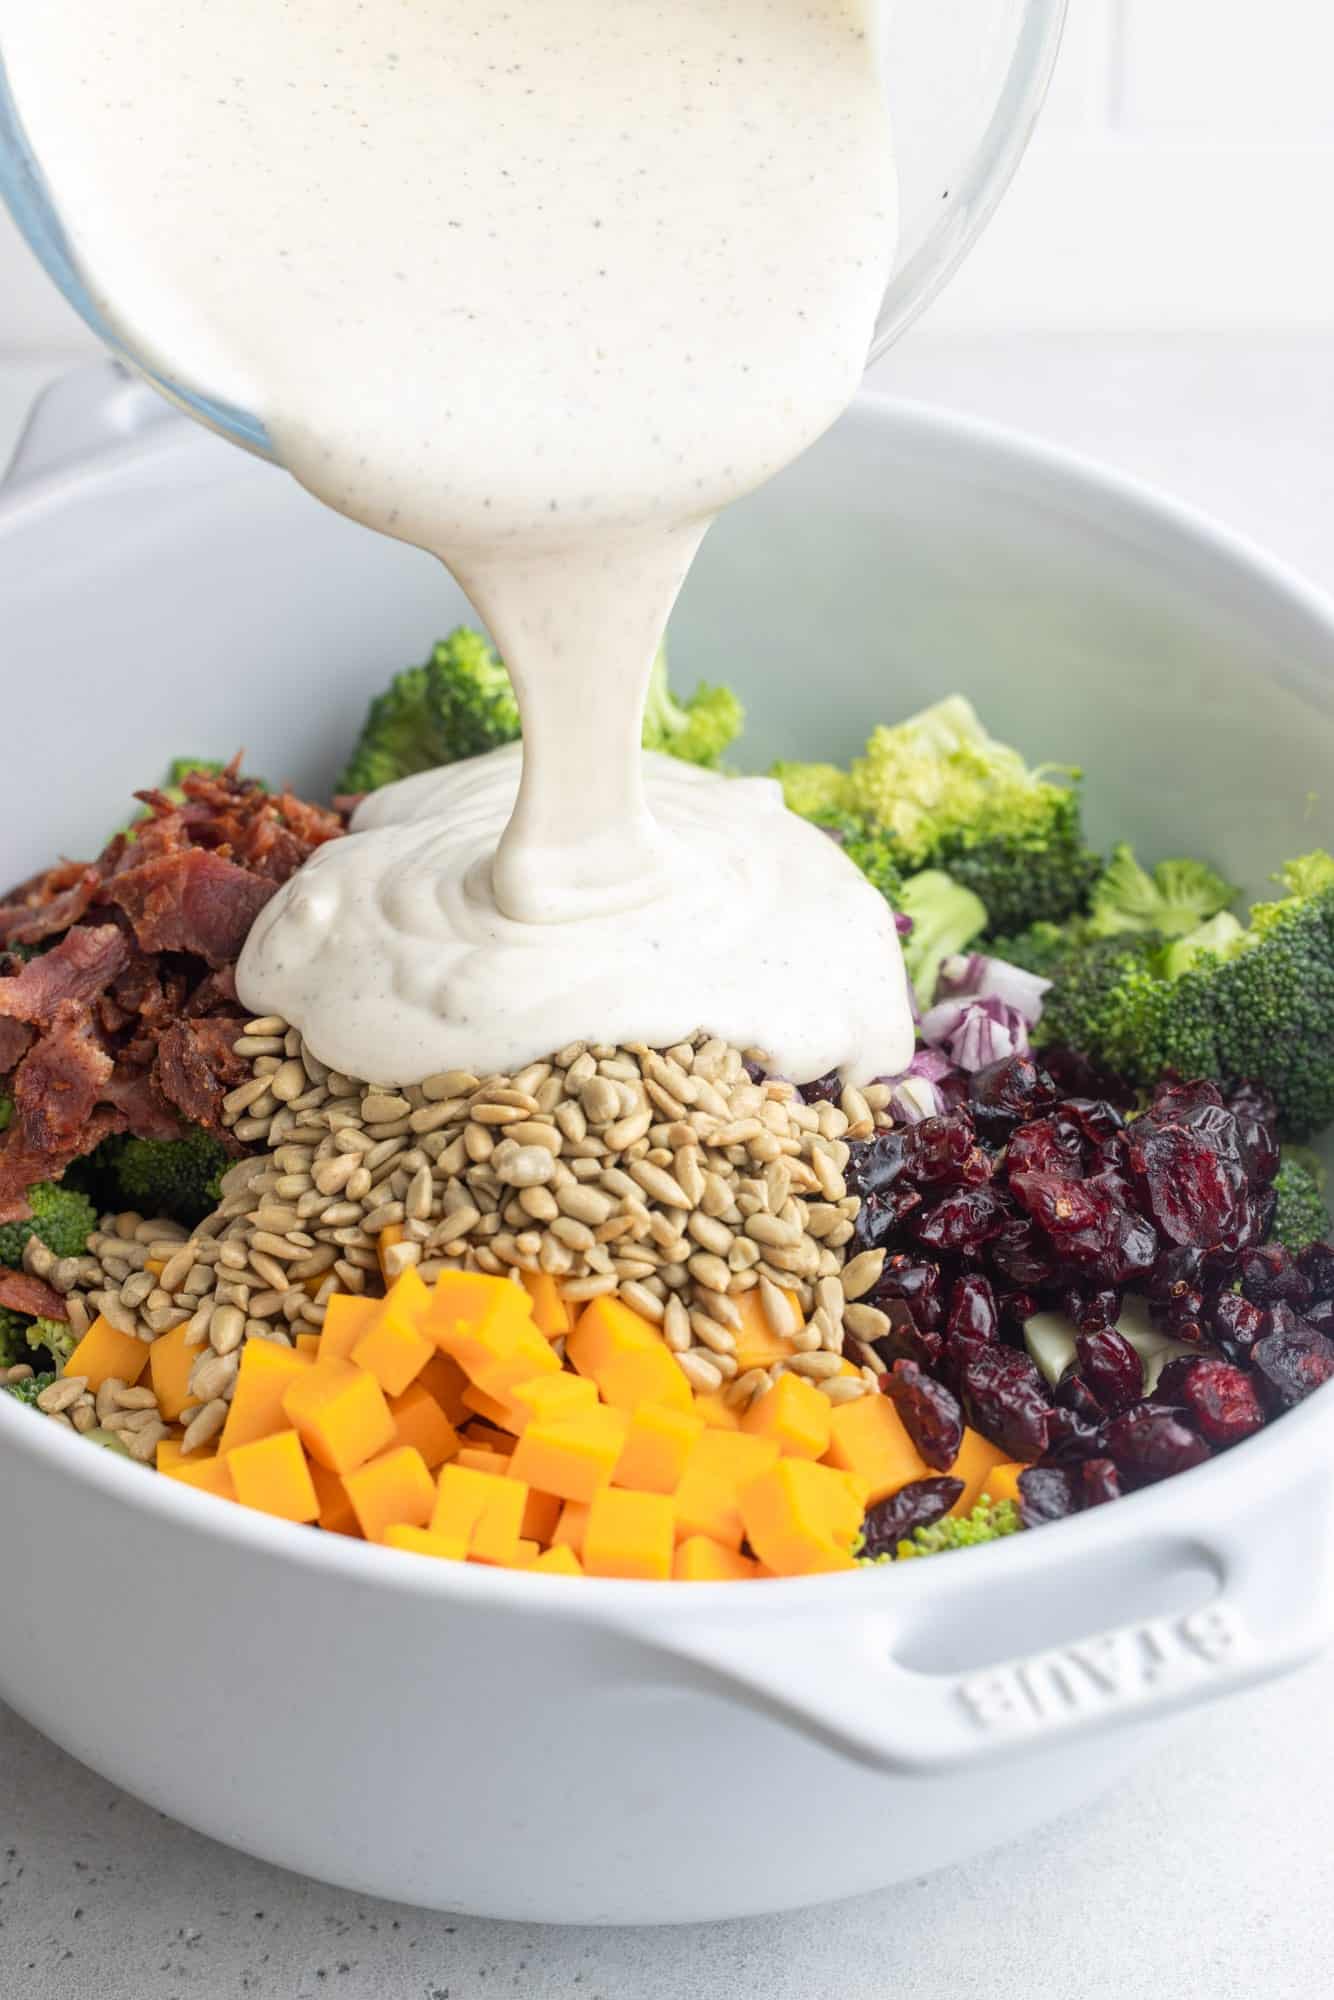 Creamy dressing poured over broccoli, sunflower seeds, cheese, bacon, and cranberries